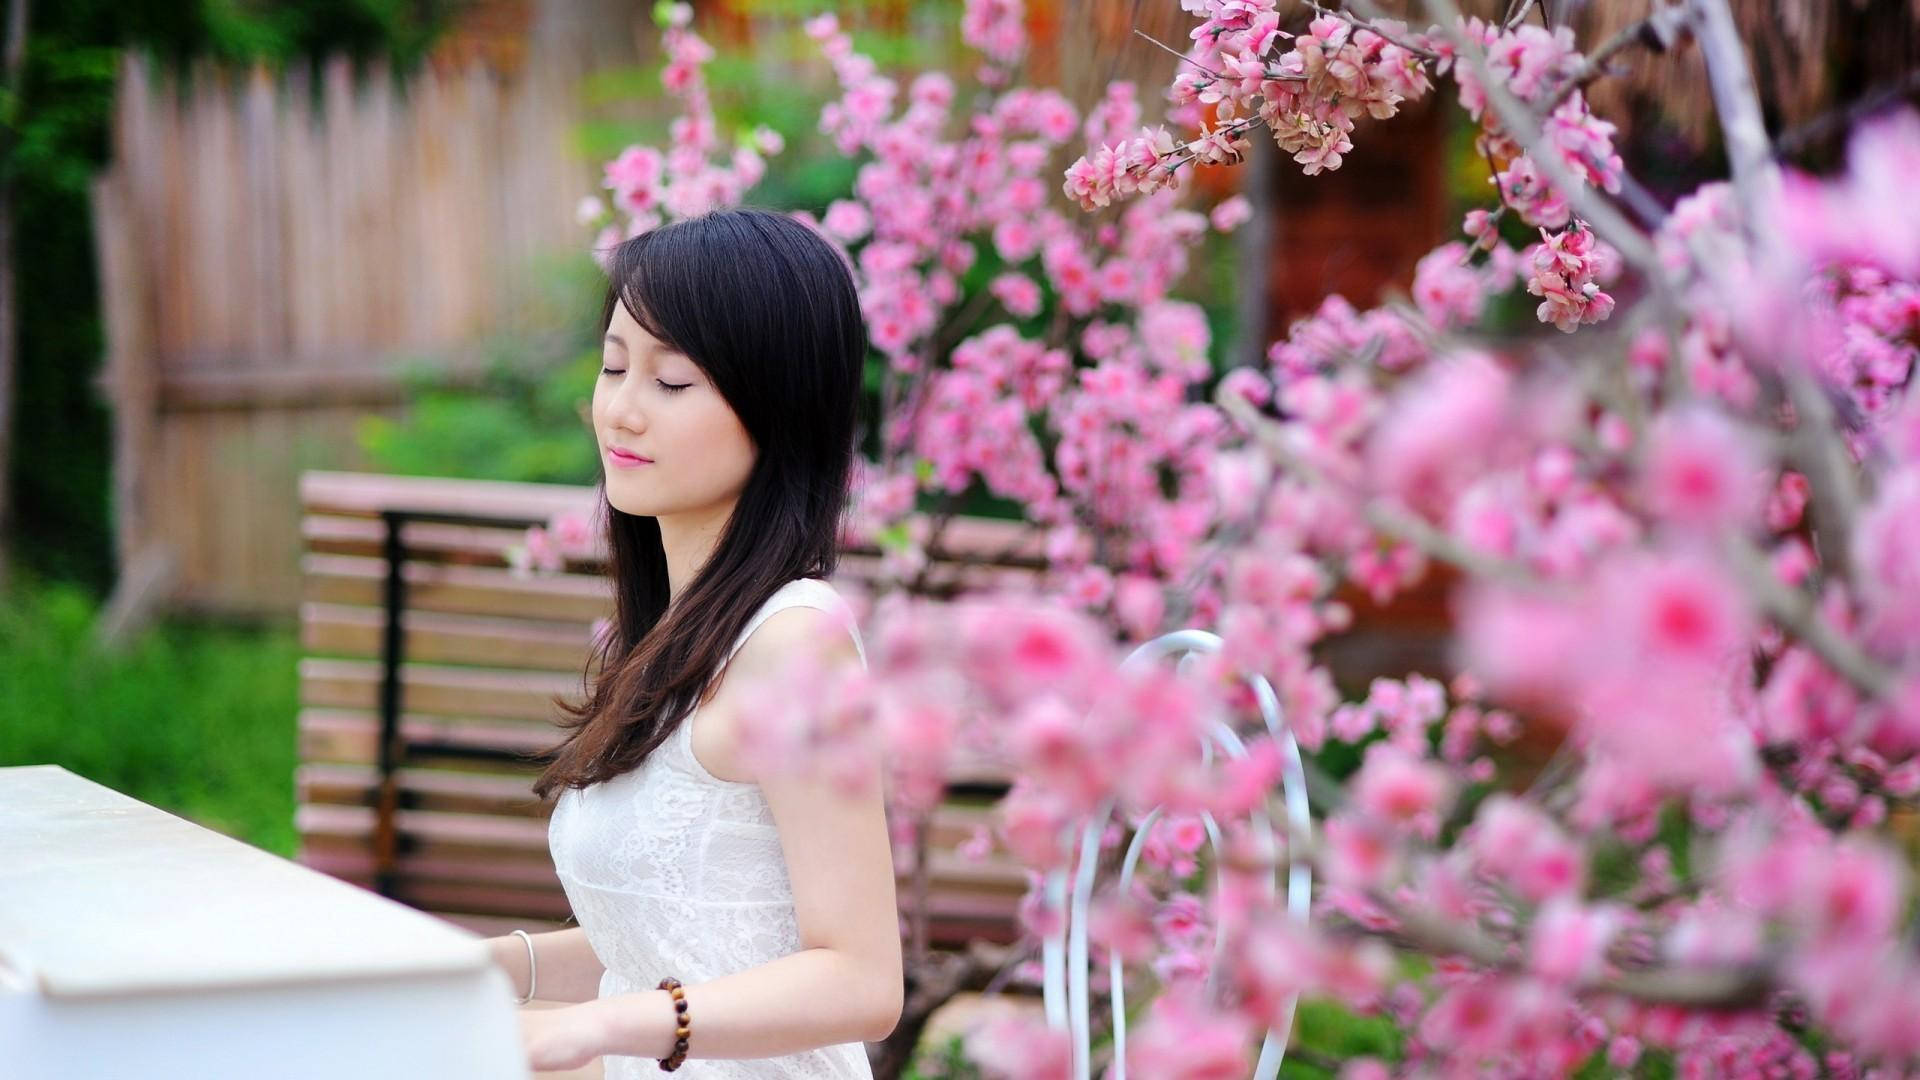 Japan Girl Playing Piano Pink Garden Flowers Picture